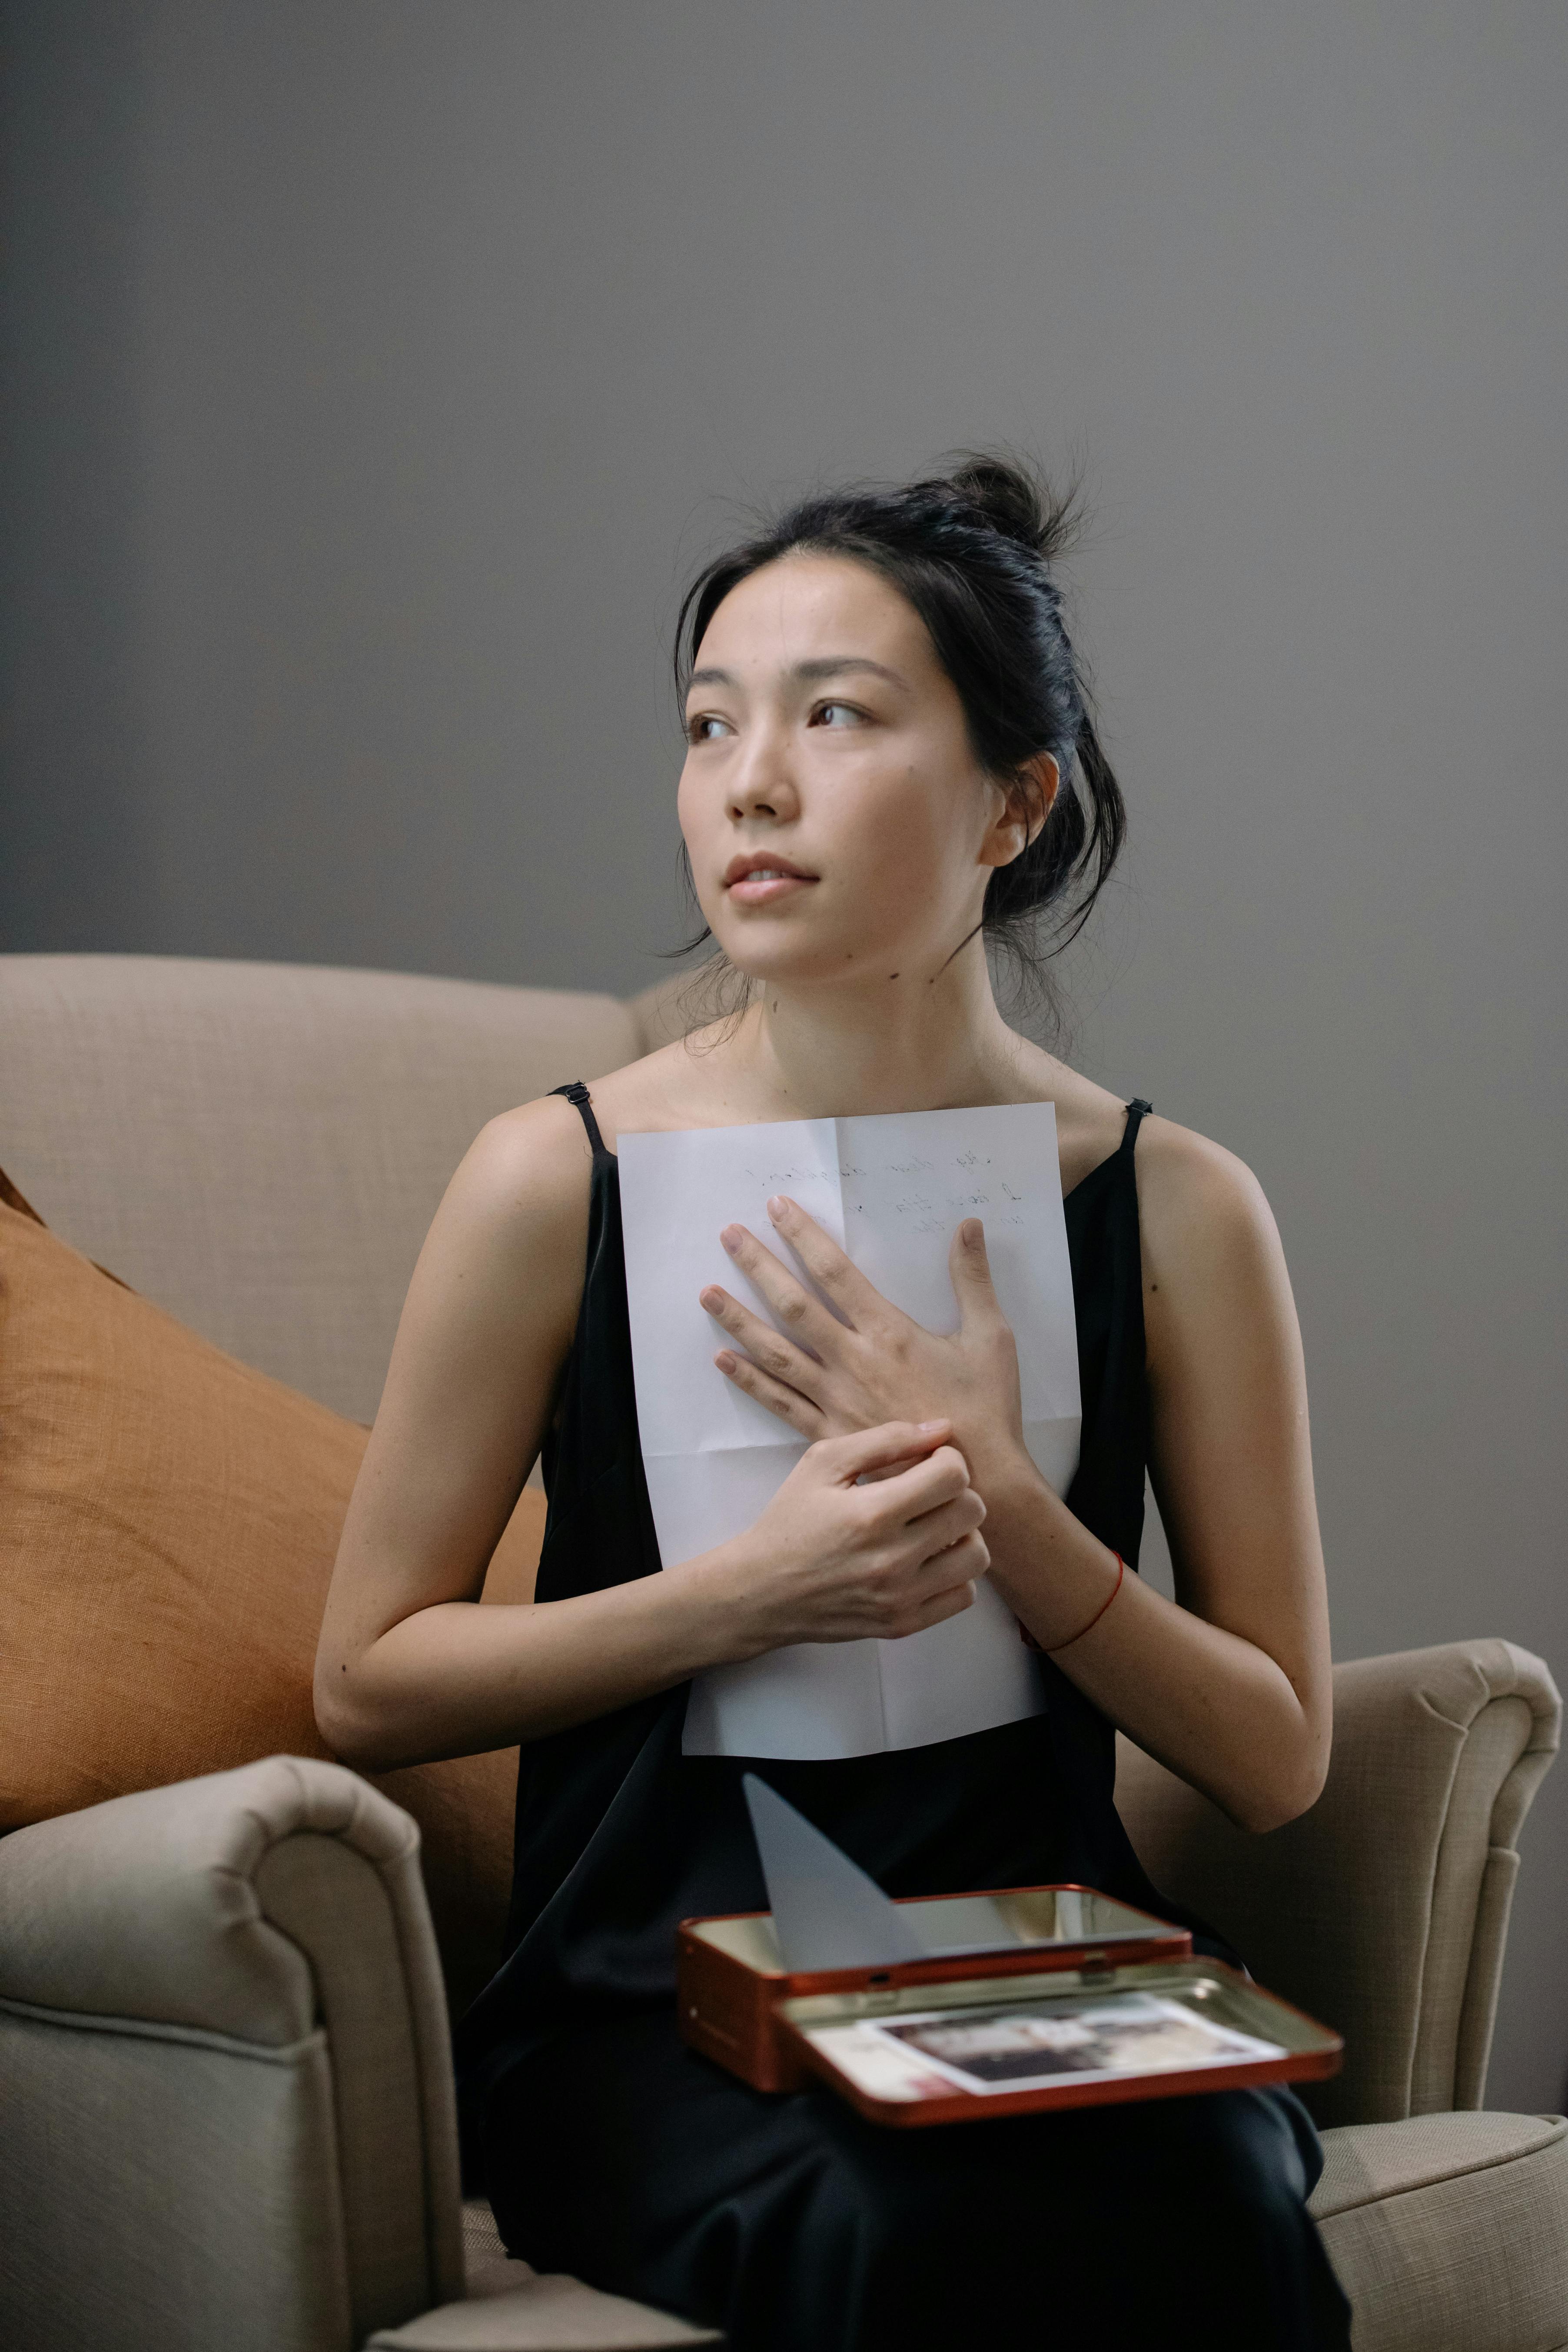 A woman holds a letter to her chest | Source: Pexels